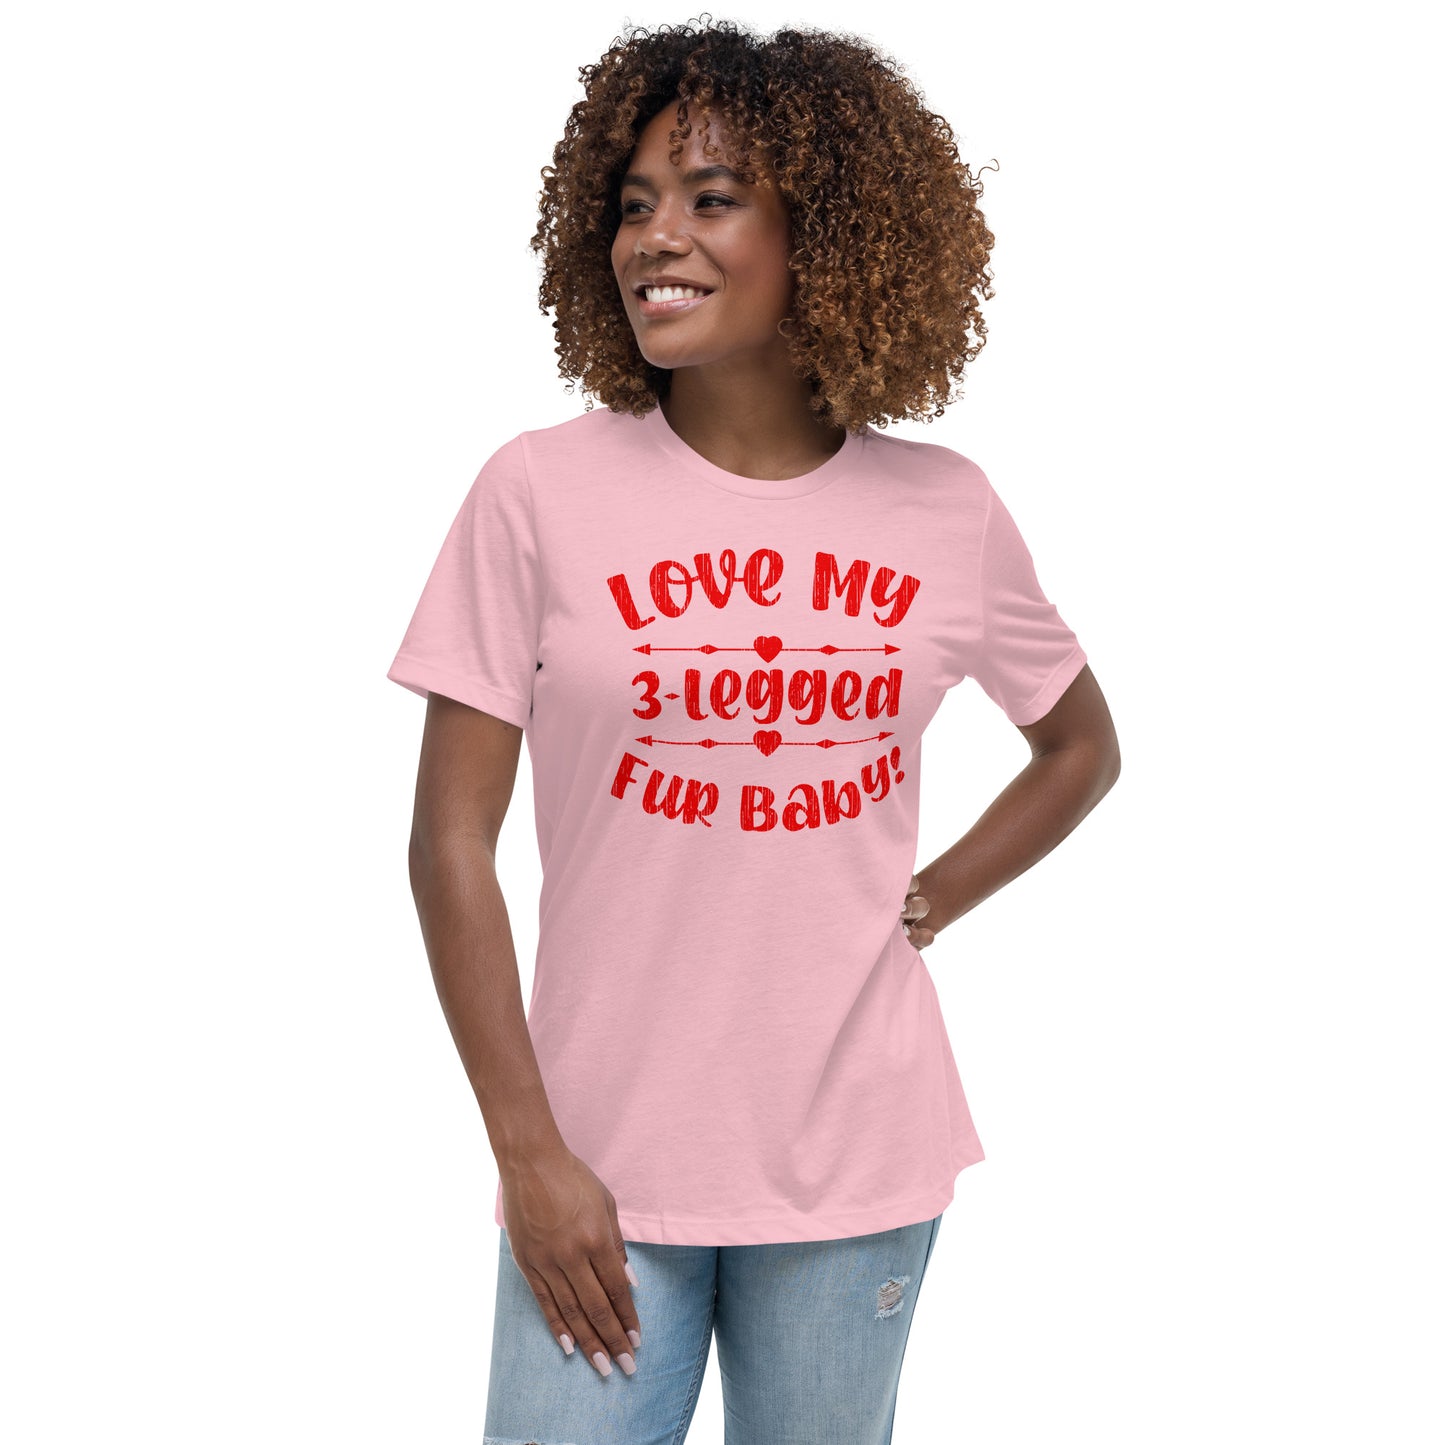 Love my 3-legged fur baby women’s relaxed fit t-shirts by Dog Artistry pink